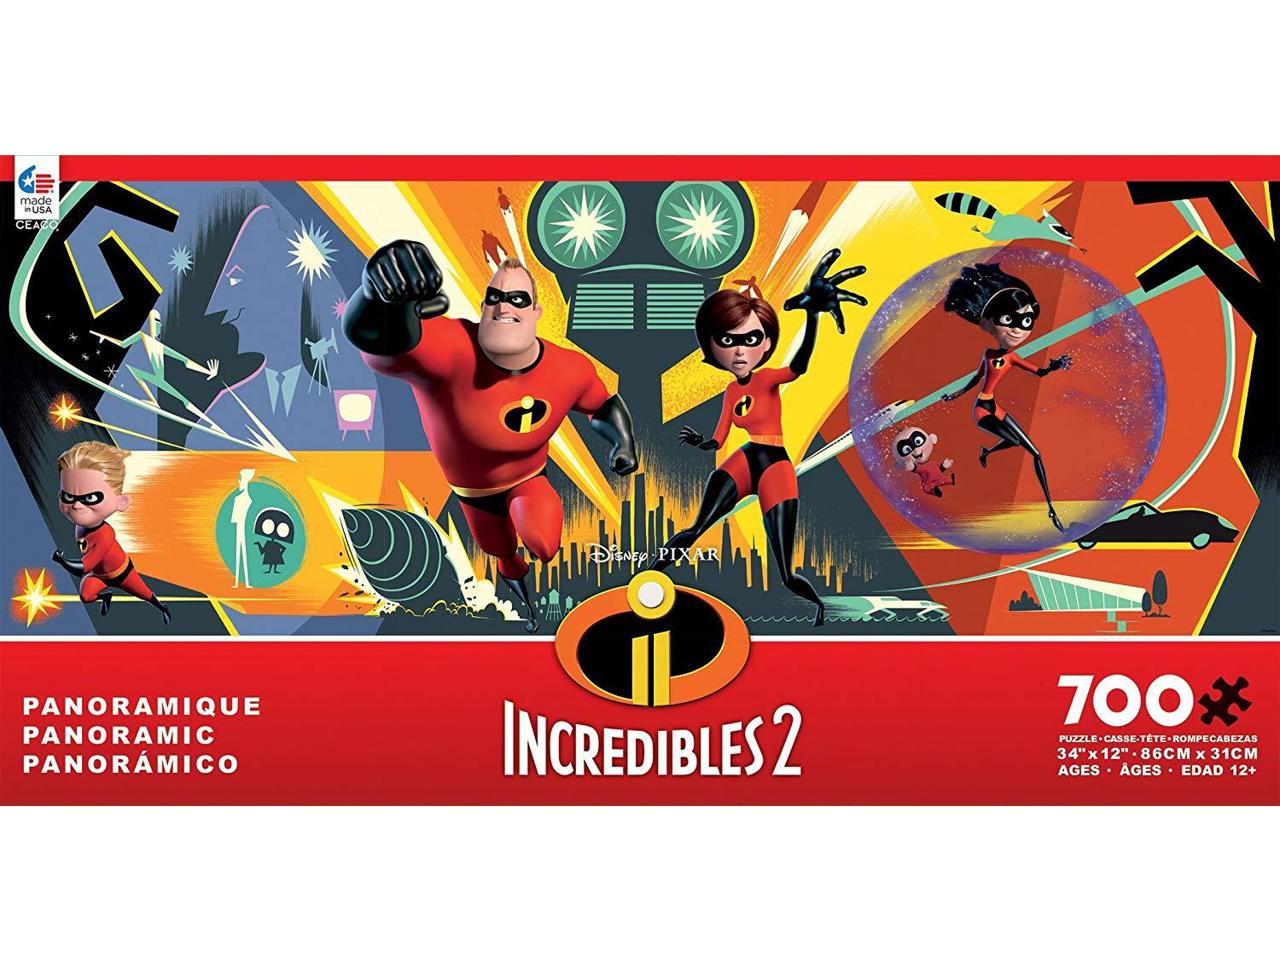 CEACO DISNEY PANORAMIC JIGSAW PUZZLE INCREDIBLES 2-700 PCS #2919-5 